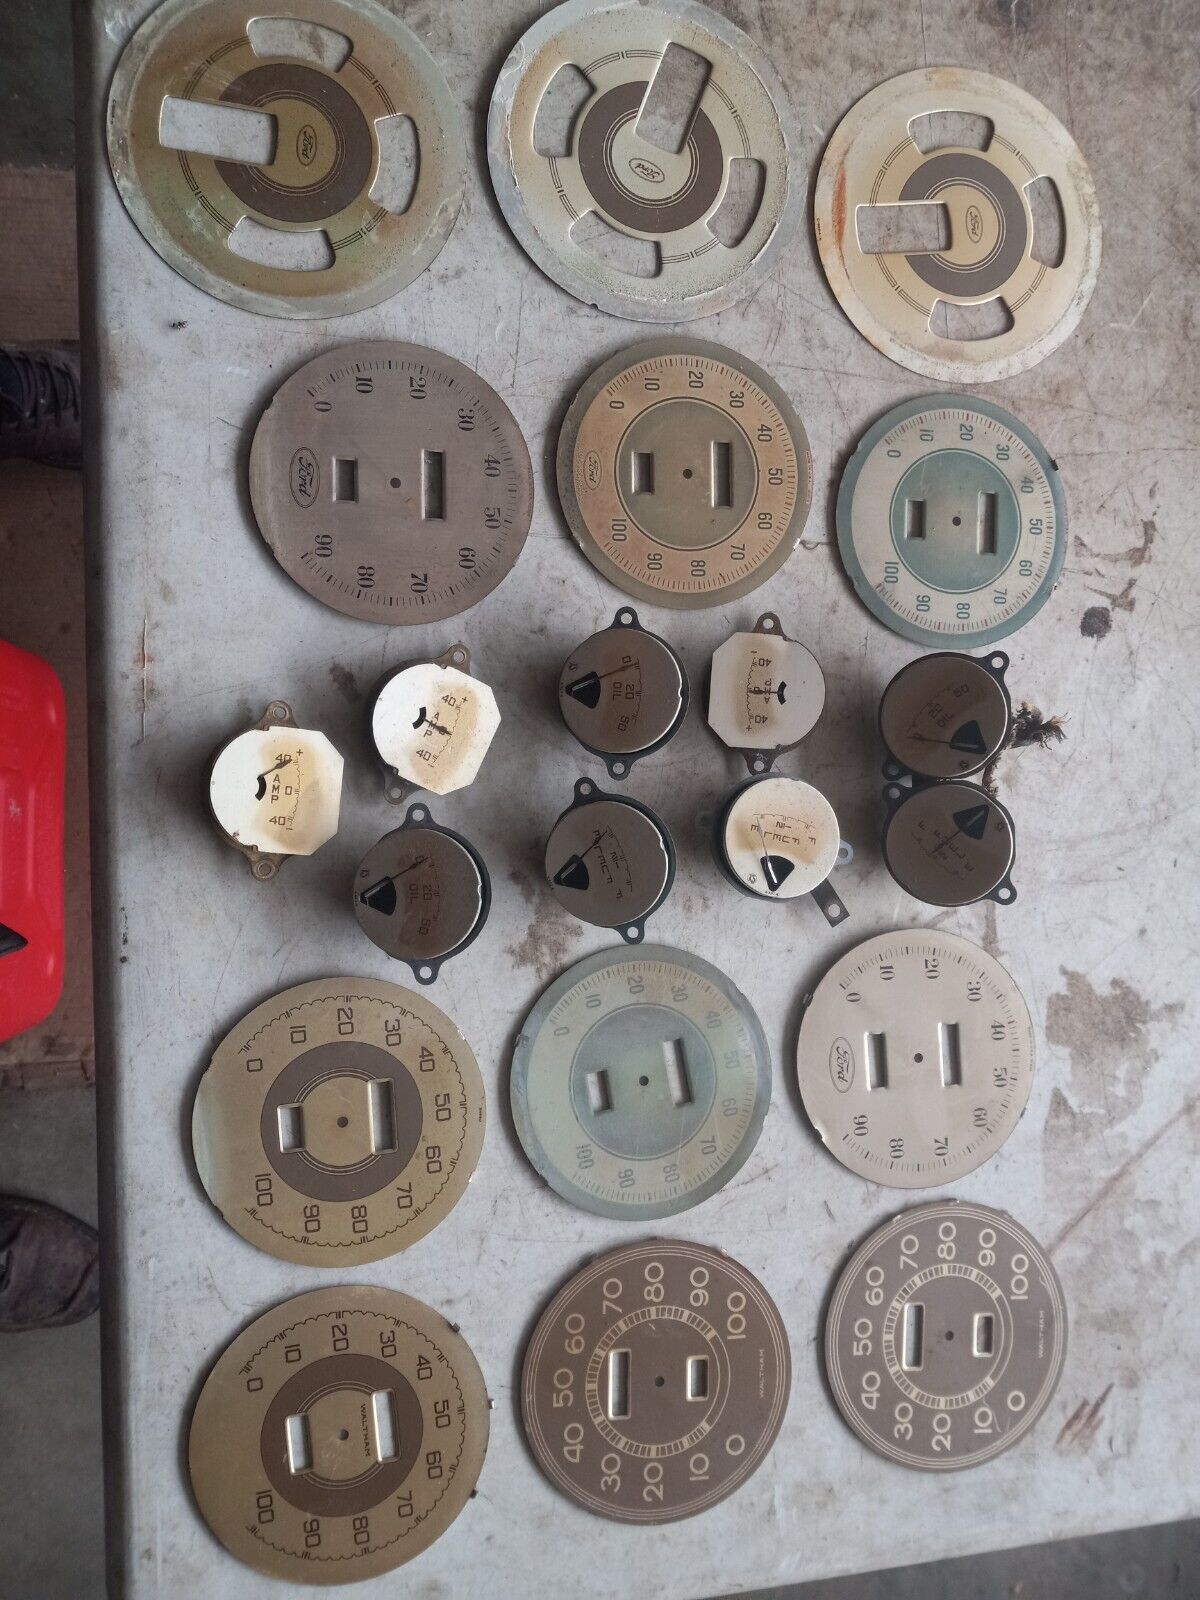 1930s or 40s Ford speedo gauges and face plates